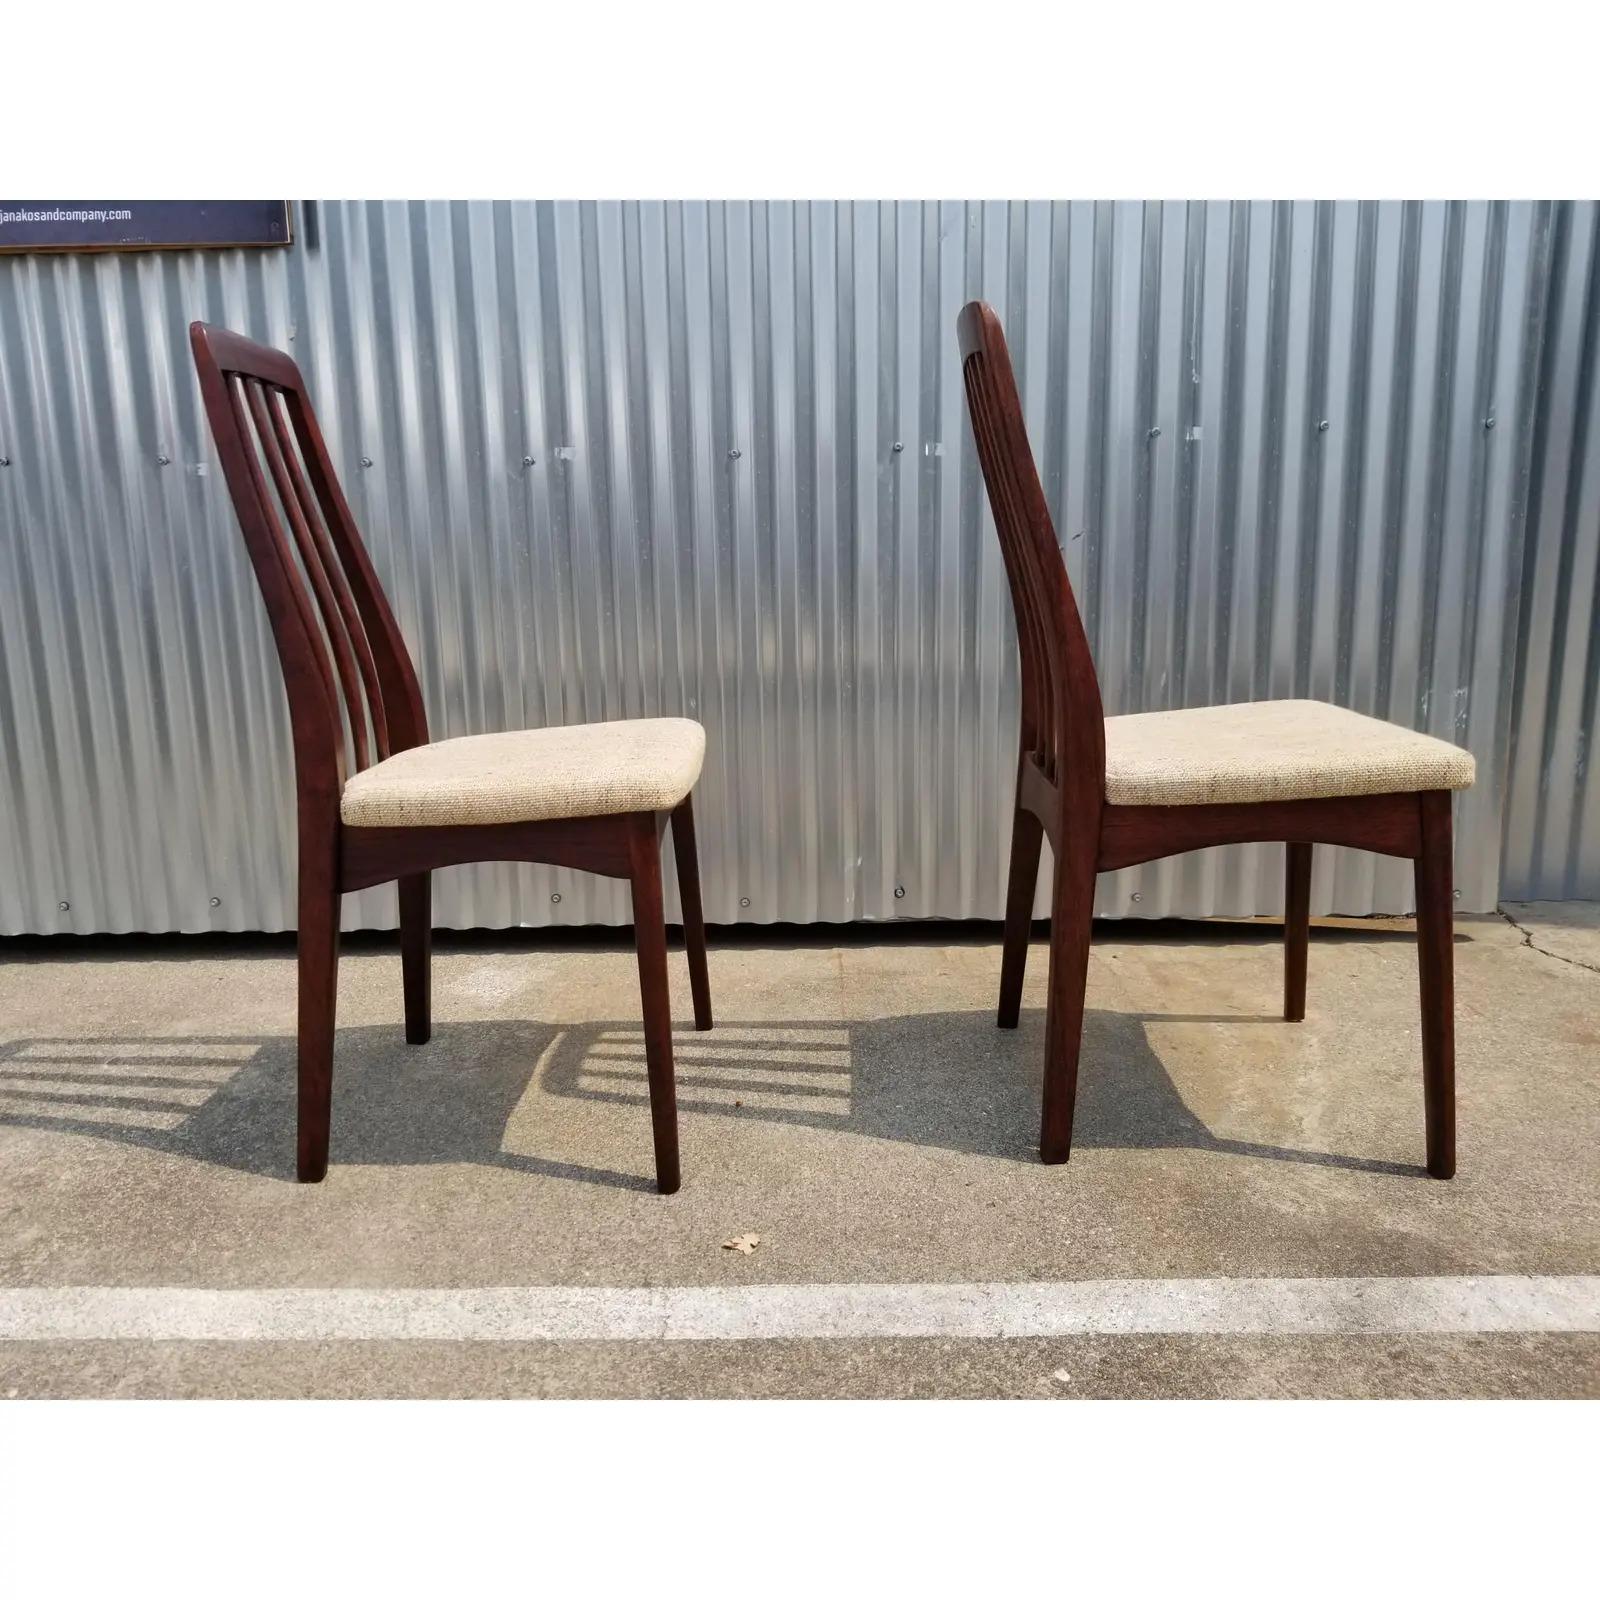 20th Century Rosewood Danish Modern Dining Chairs by Svegards, a Pair